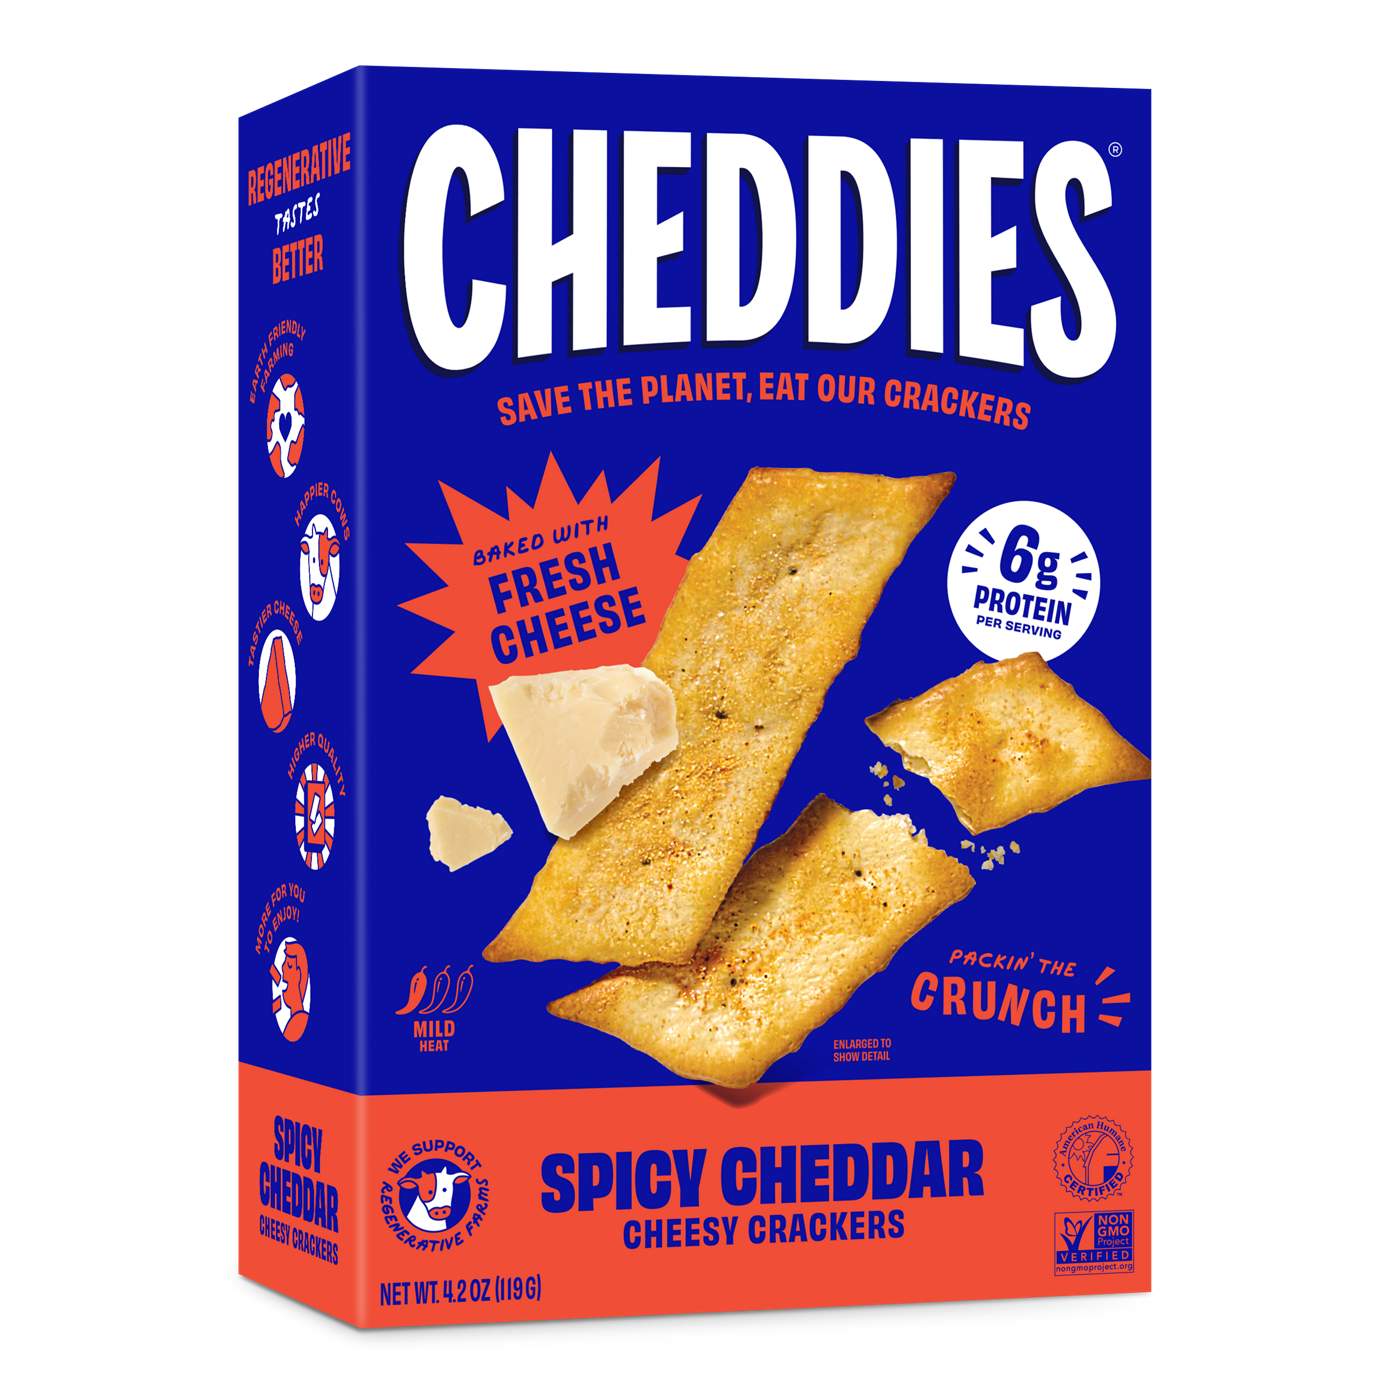 Cheddies Cheese Crackers - Spicy Cheddar; image 1 of 2